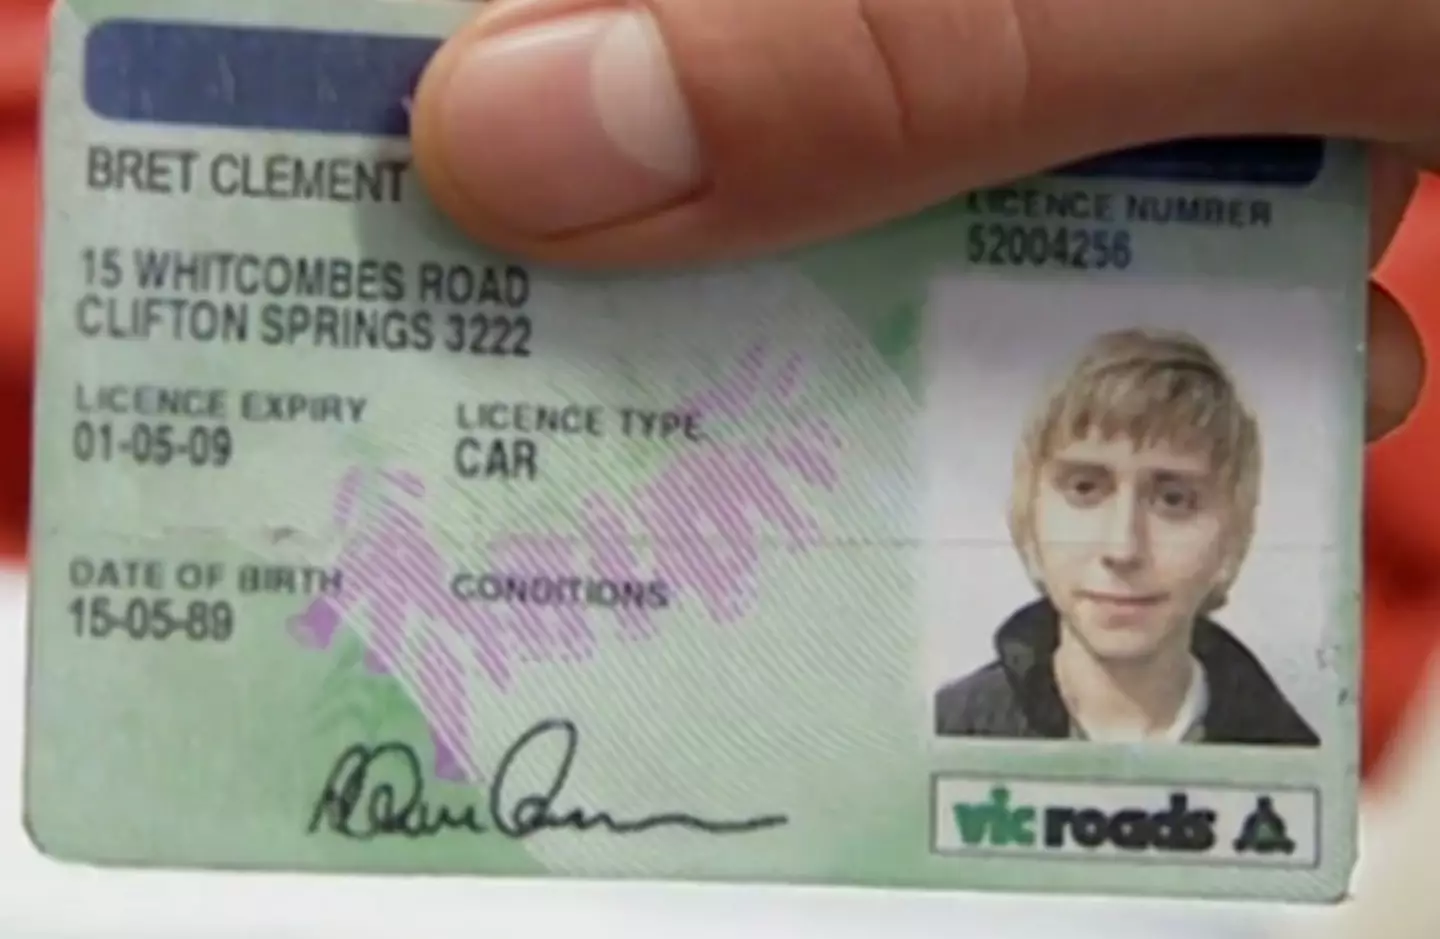 Jay Cartwright comically whipped out a fake Australian driver's license in the first episode of the sitcom (Channel 4)